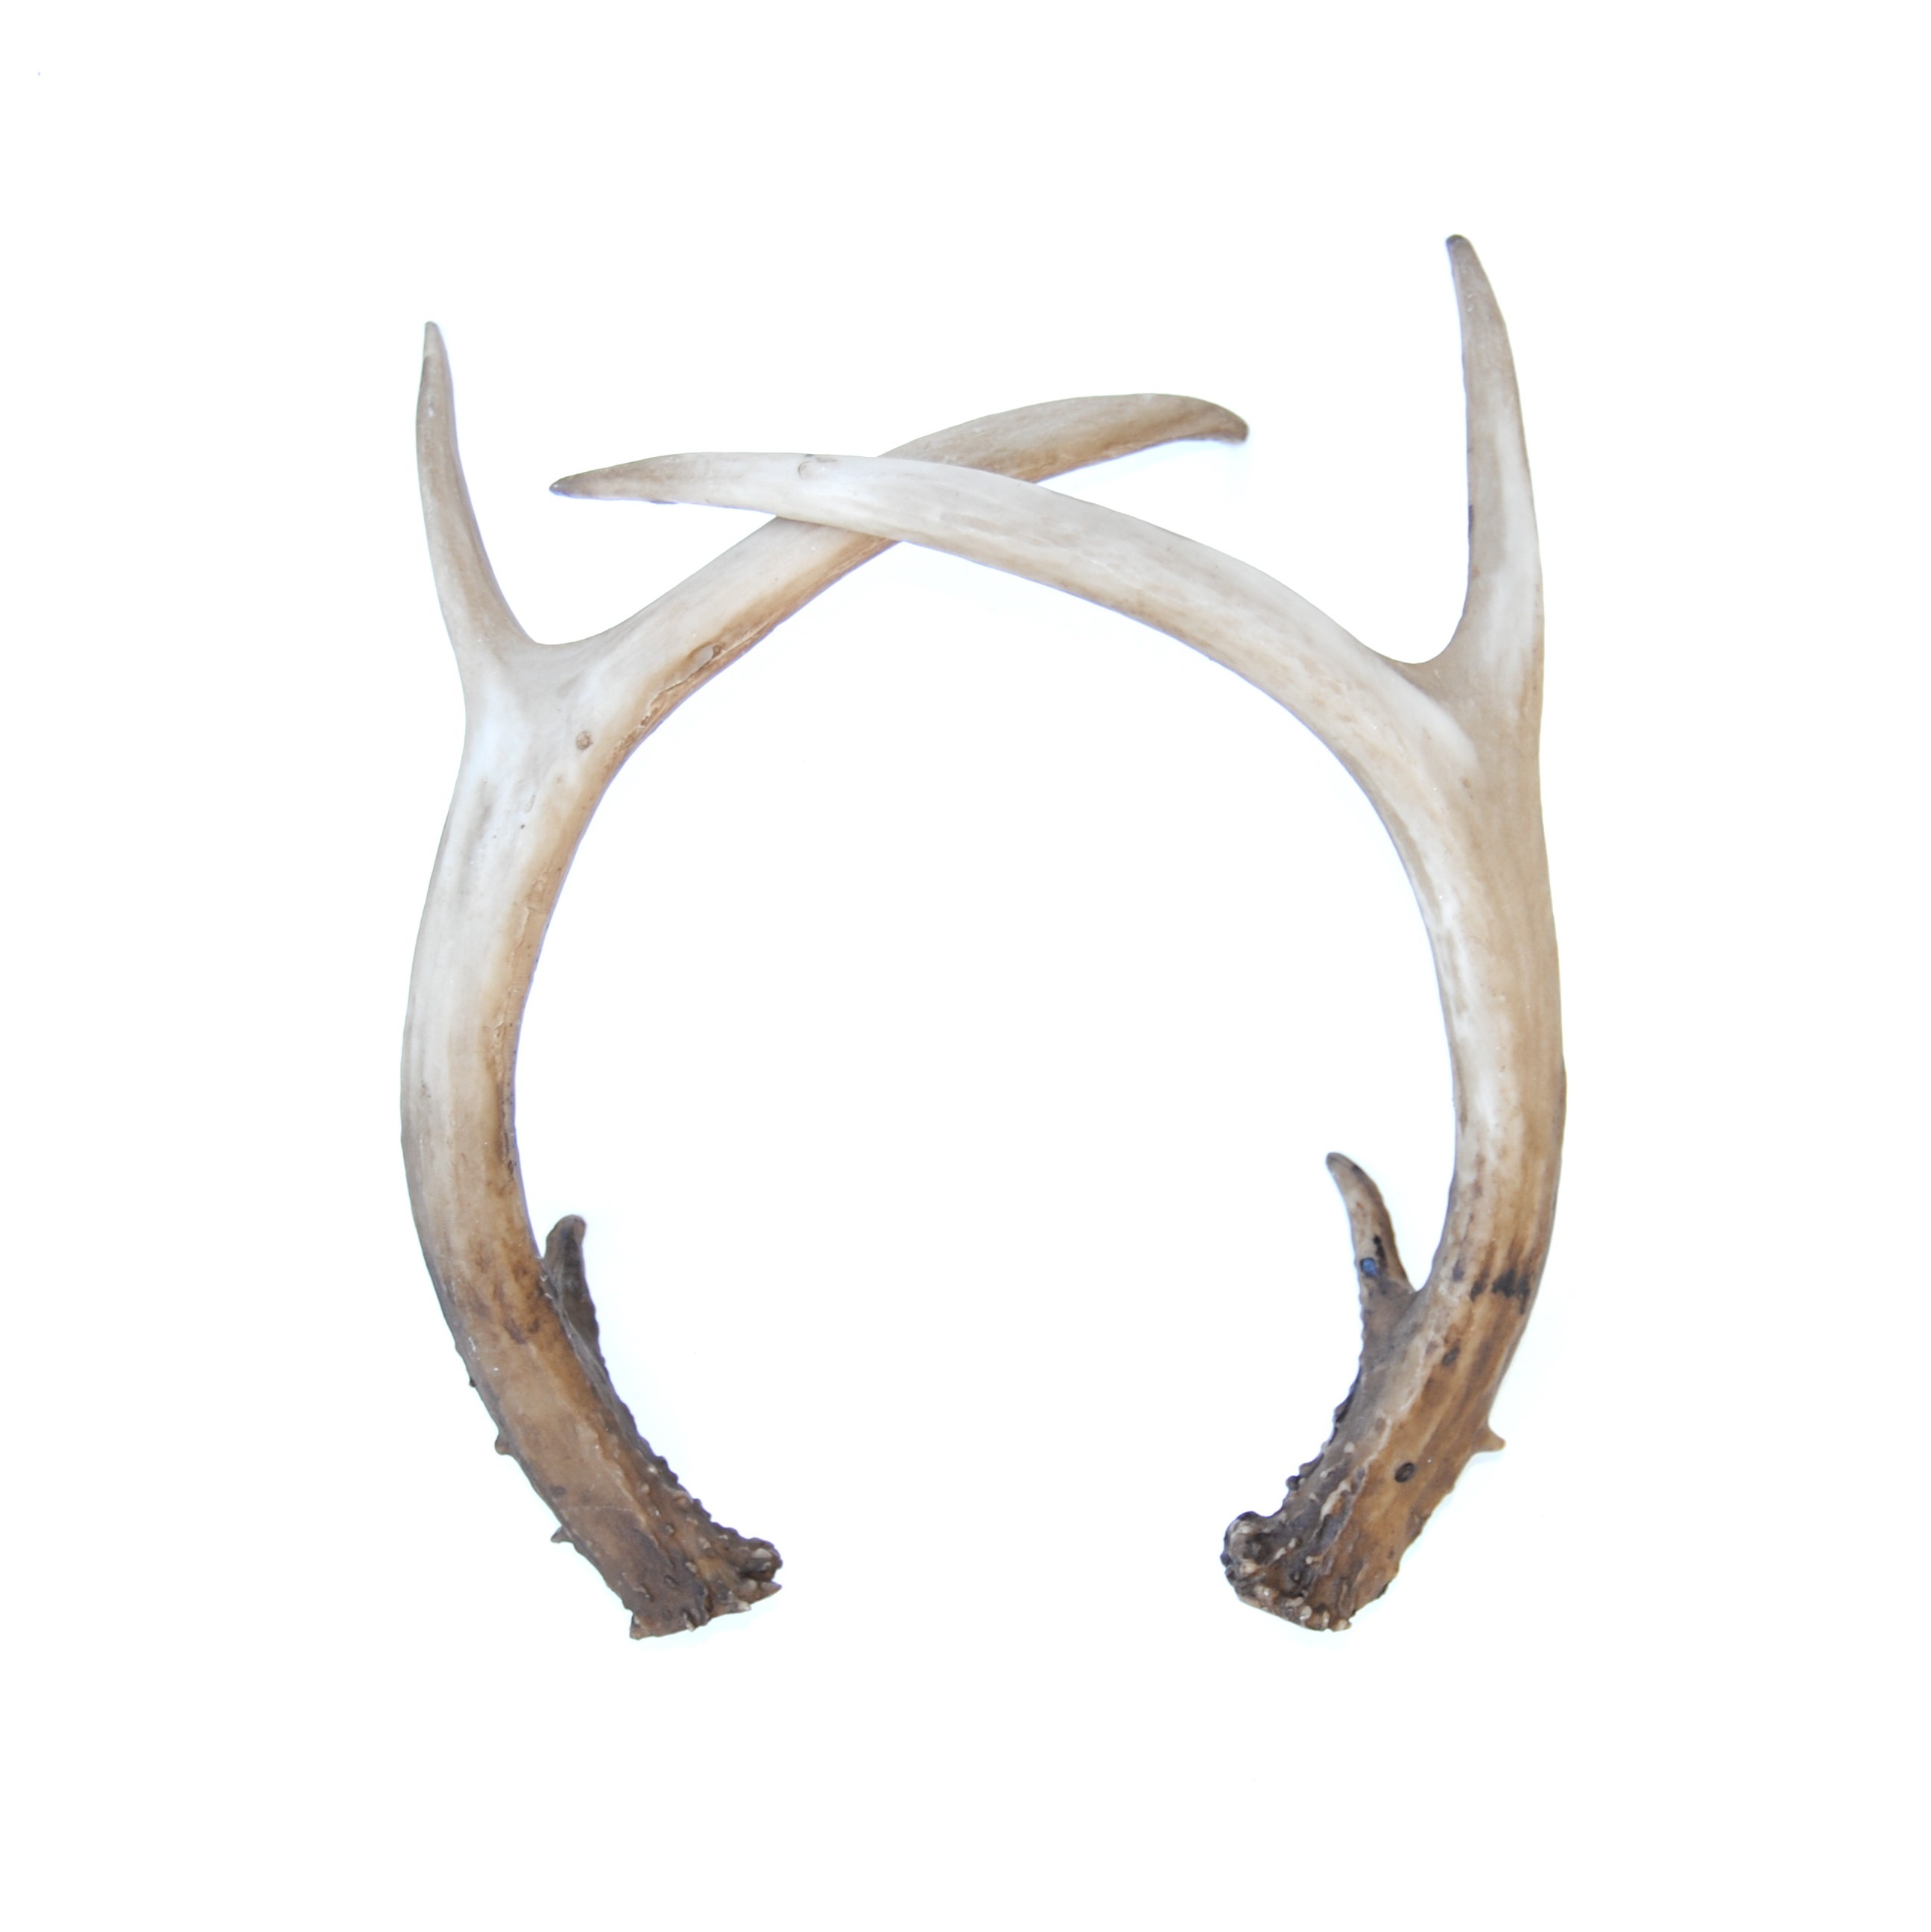 Faux Table Top Antler Decor (Pair) // Natural Looking